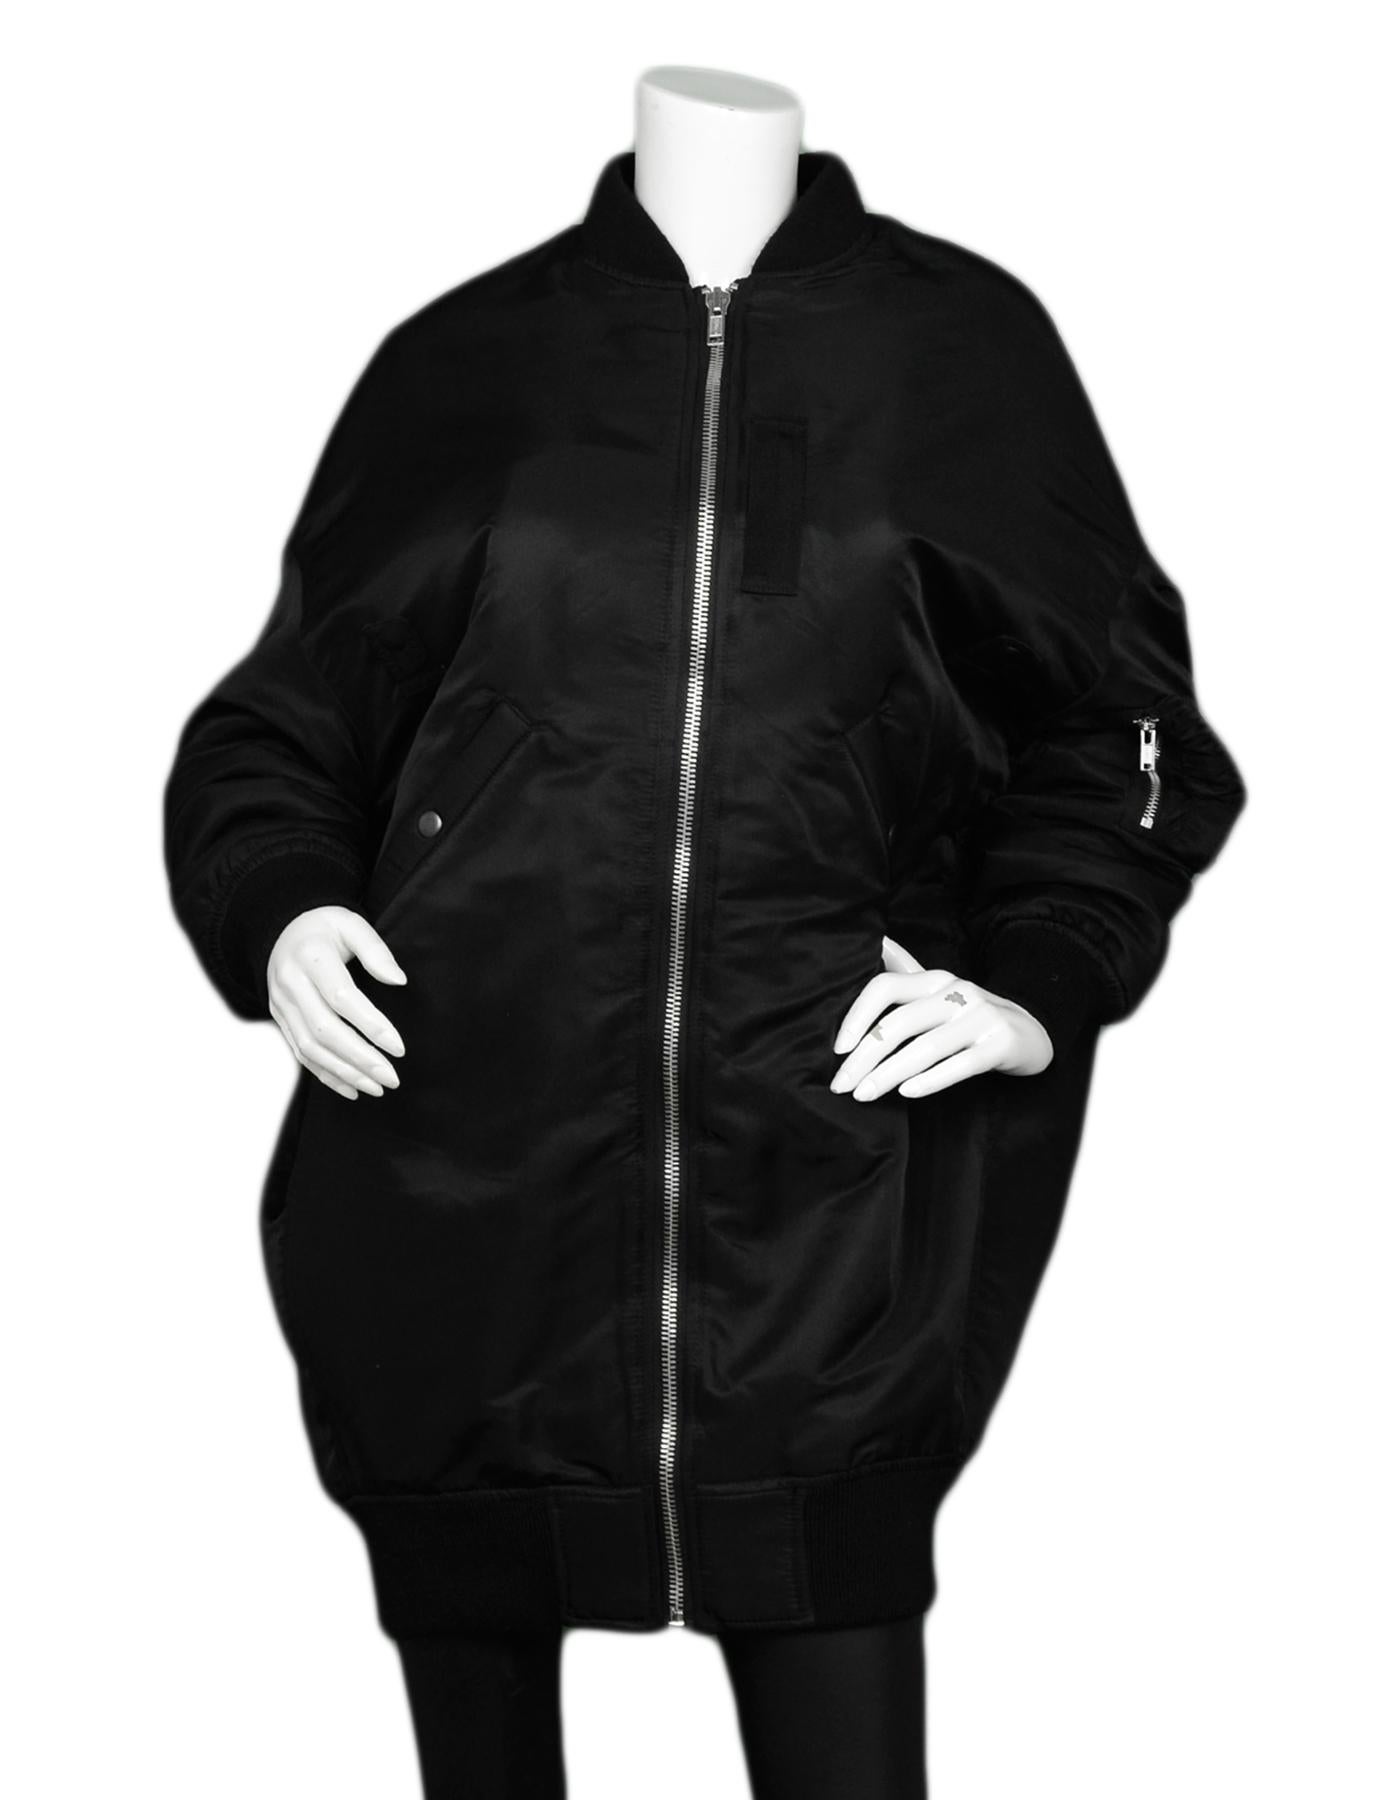 R13 Black Long Bomber Jacket sz S

Made In: China with Japanese Materials
Color: Black
Materials: 100% Nylon
Lining: 100% Nylon
Opening/Closure: Front zip
Overall Condition: Excellent pre-owned condition

Tag Size: US Small *Please refer to